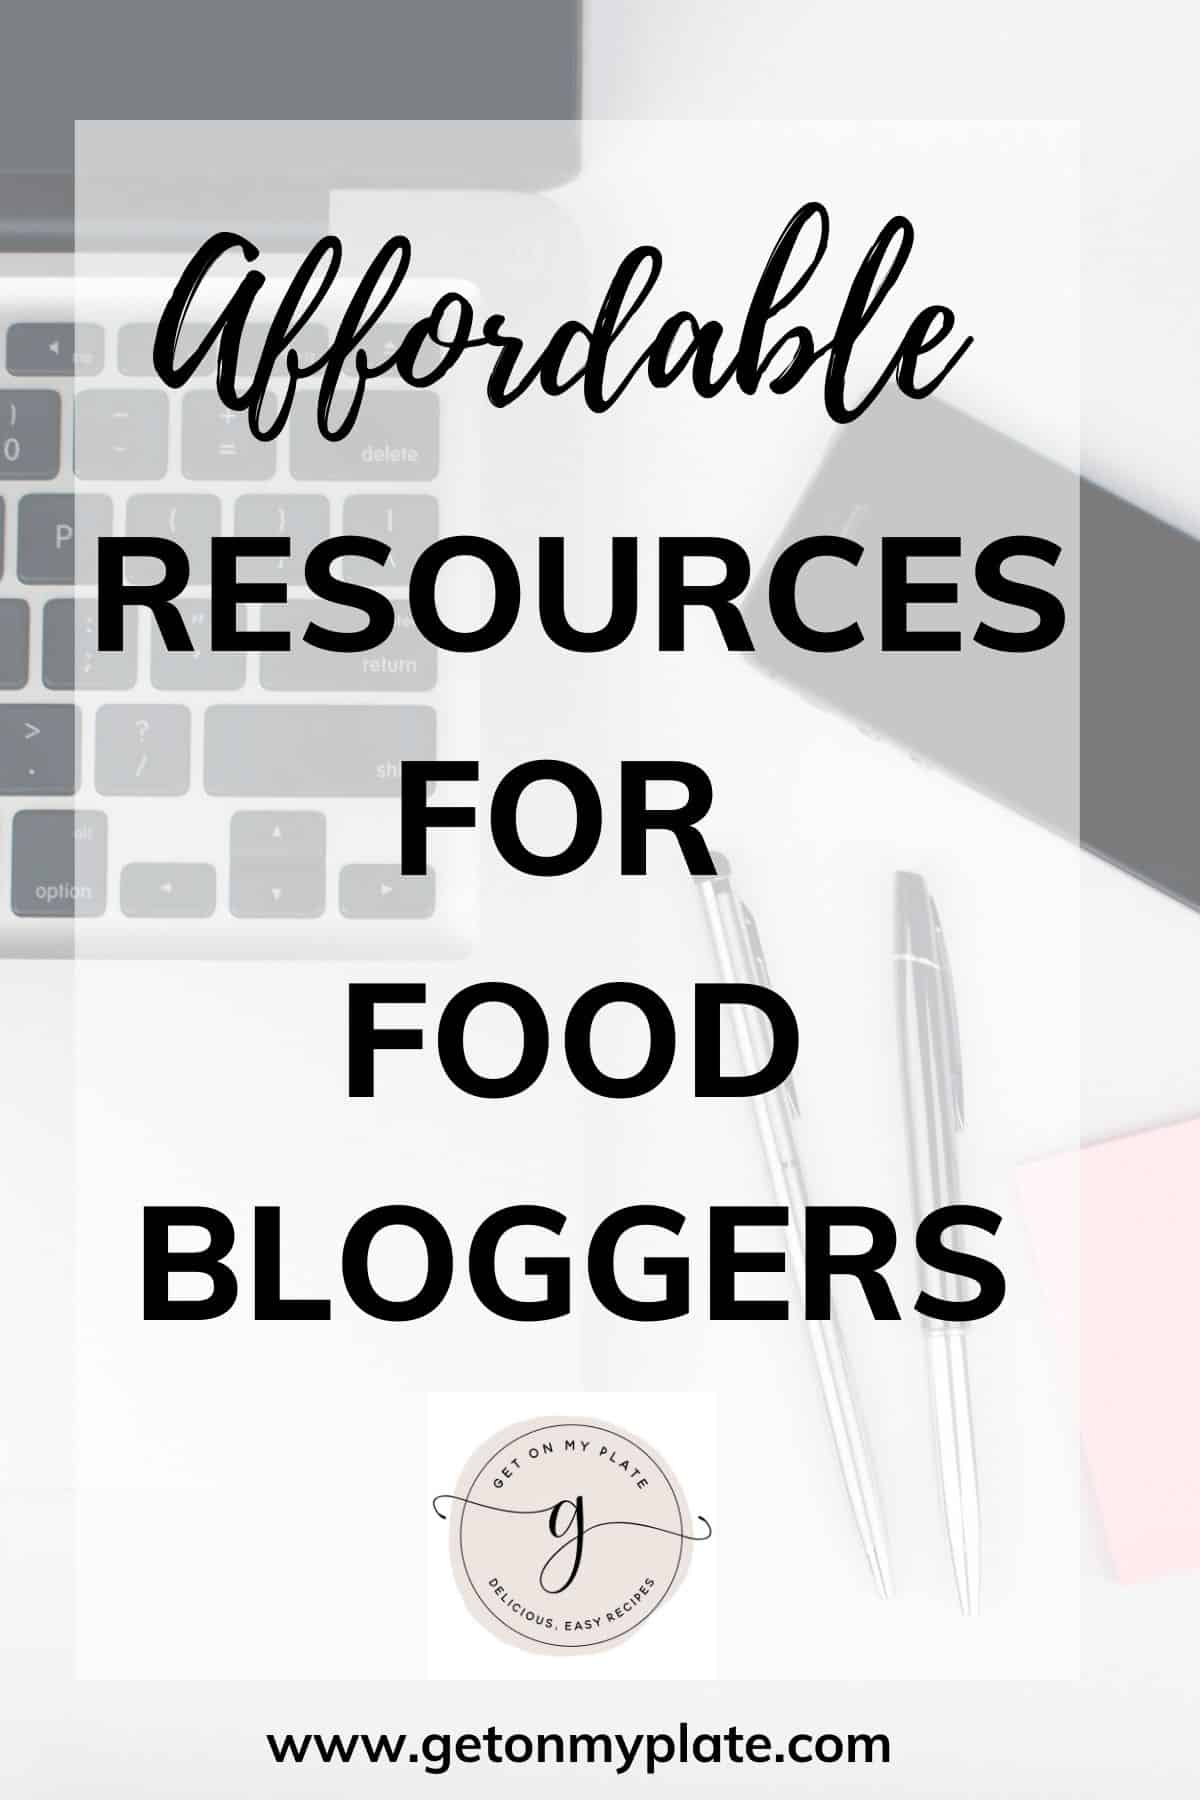 Title image Affordable Resources for Food Bloggers.